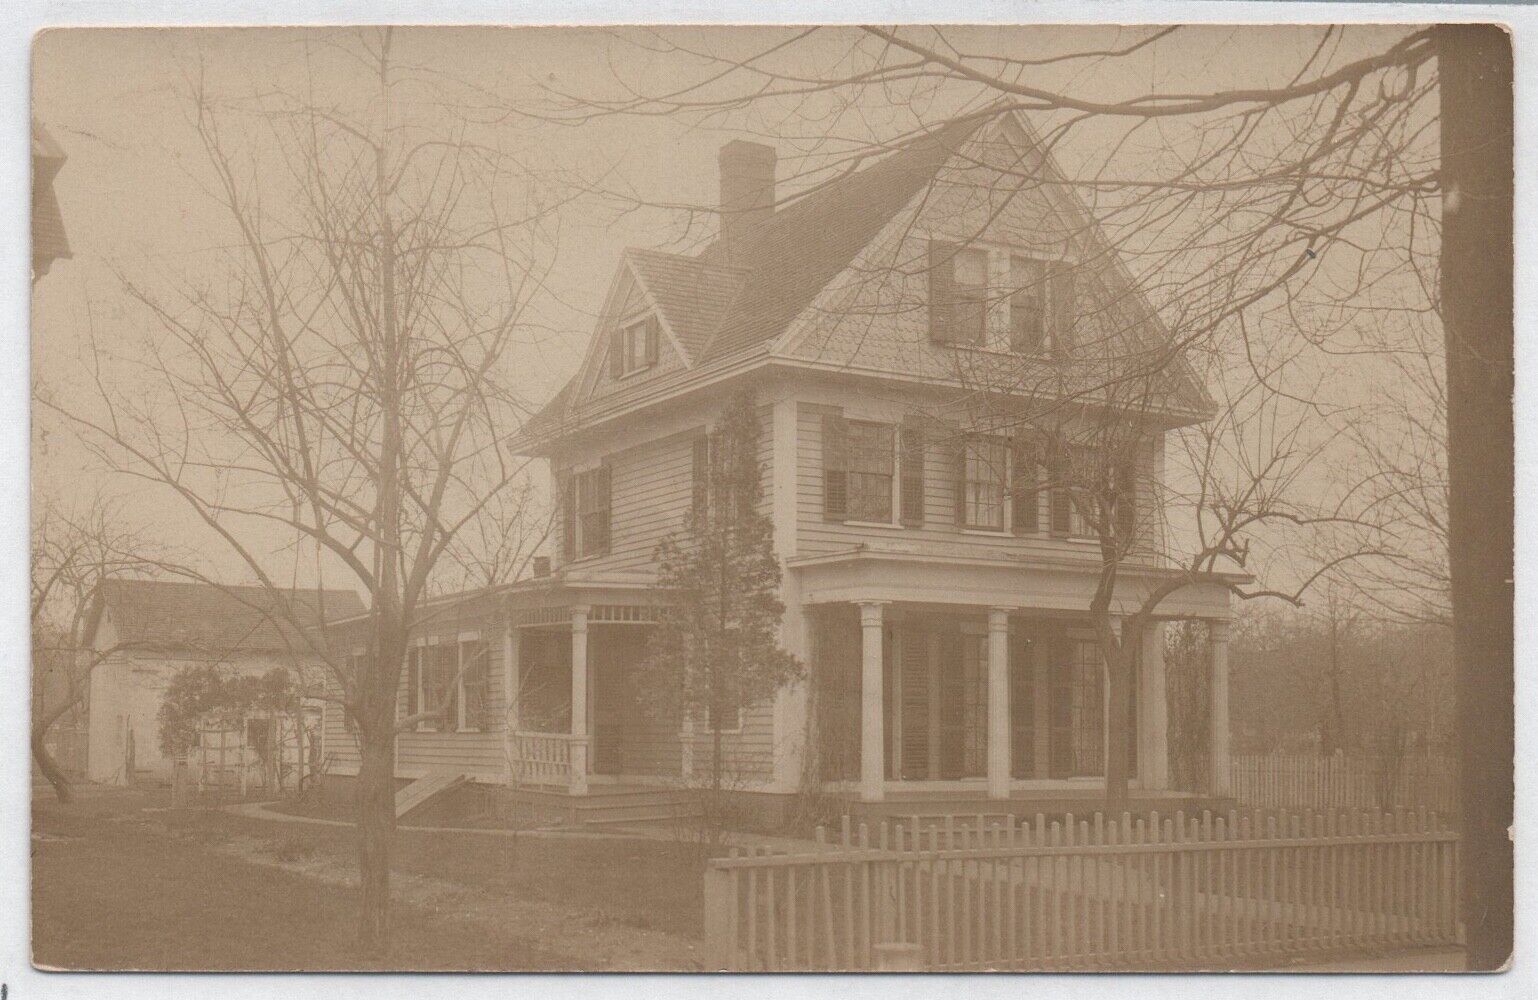 Hartford, CT House, RPPC, Postcard, Divided Back, Unposted, AZO 4 stamp box 1907